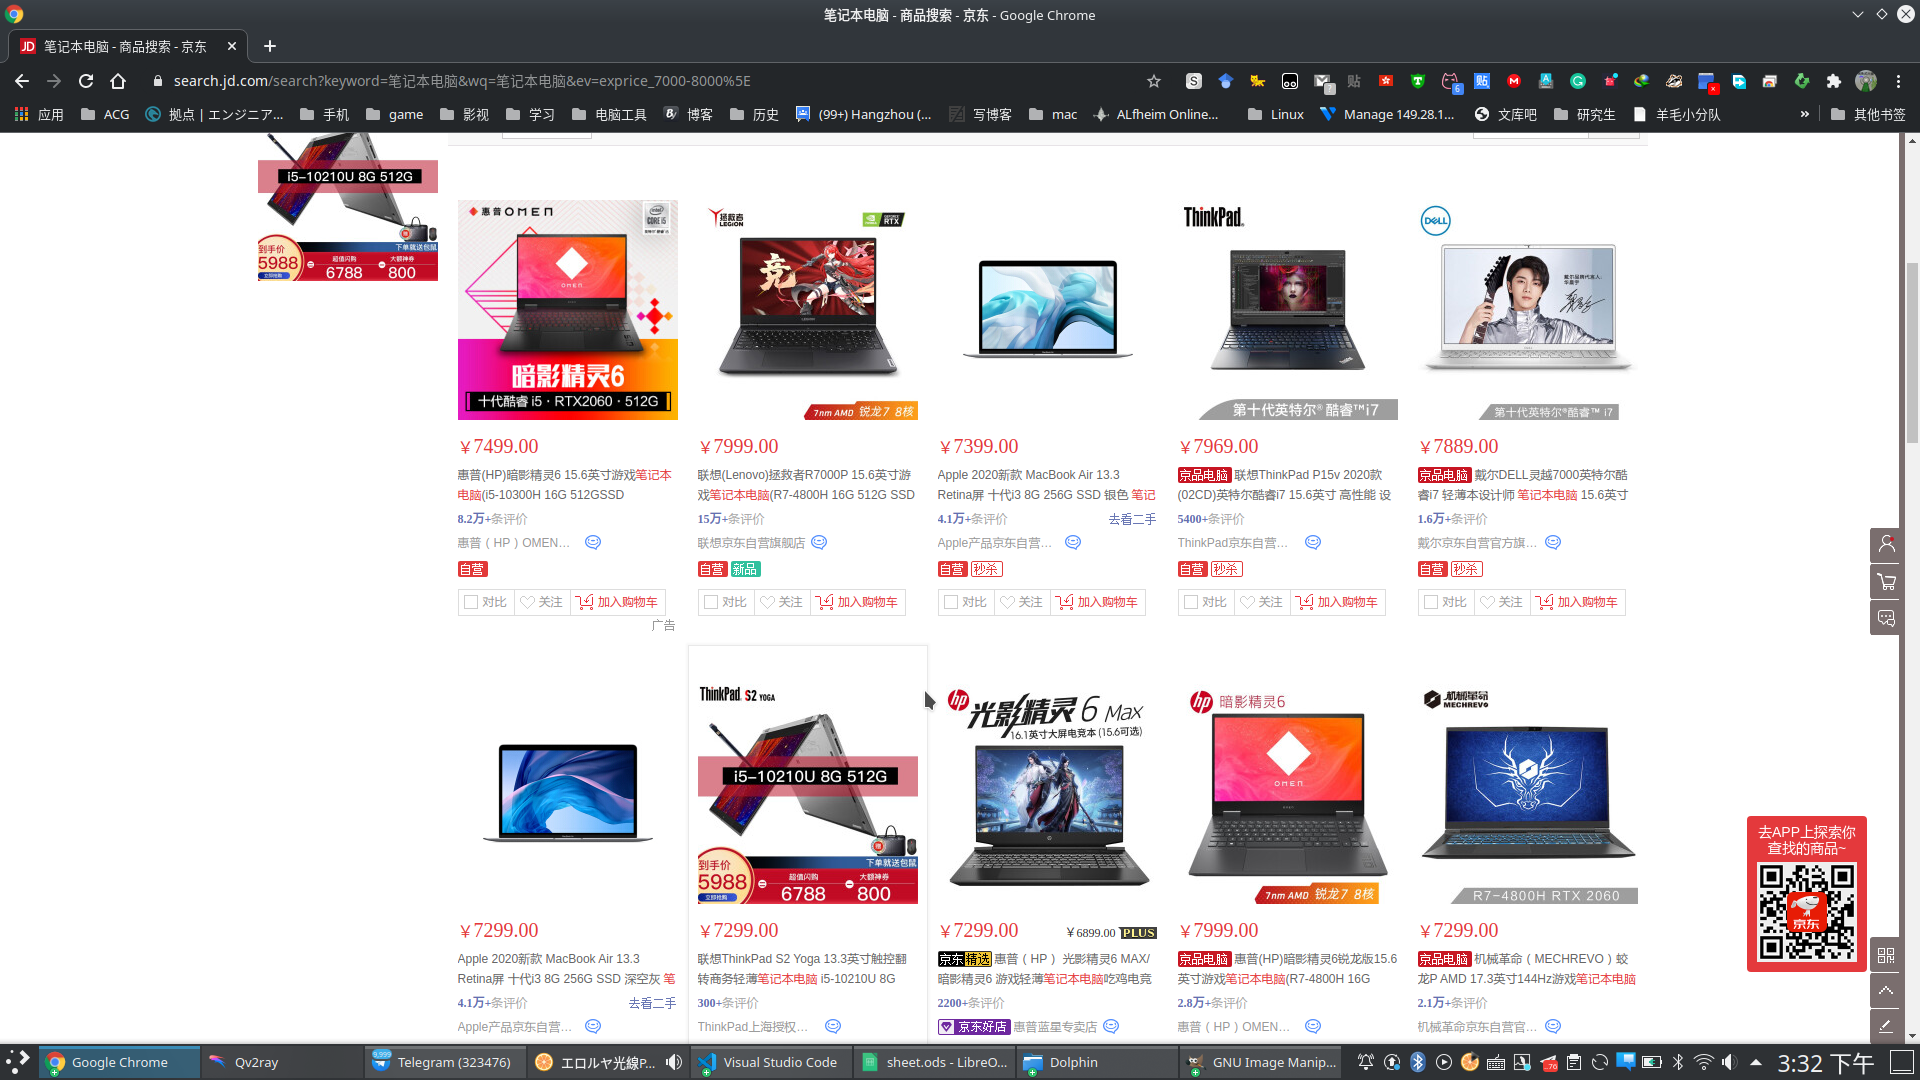 JD.com page for laptops between 7000-8000